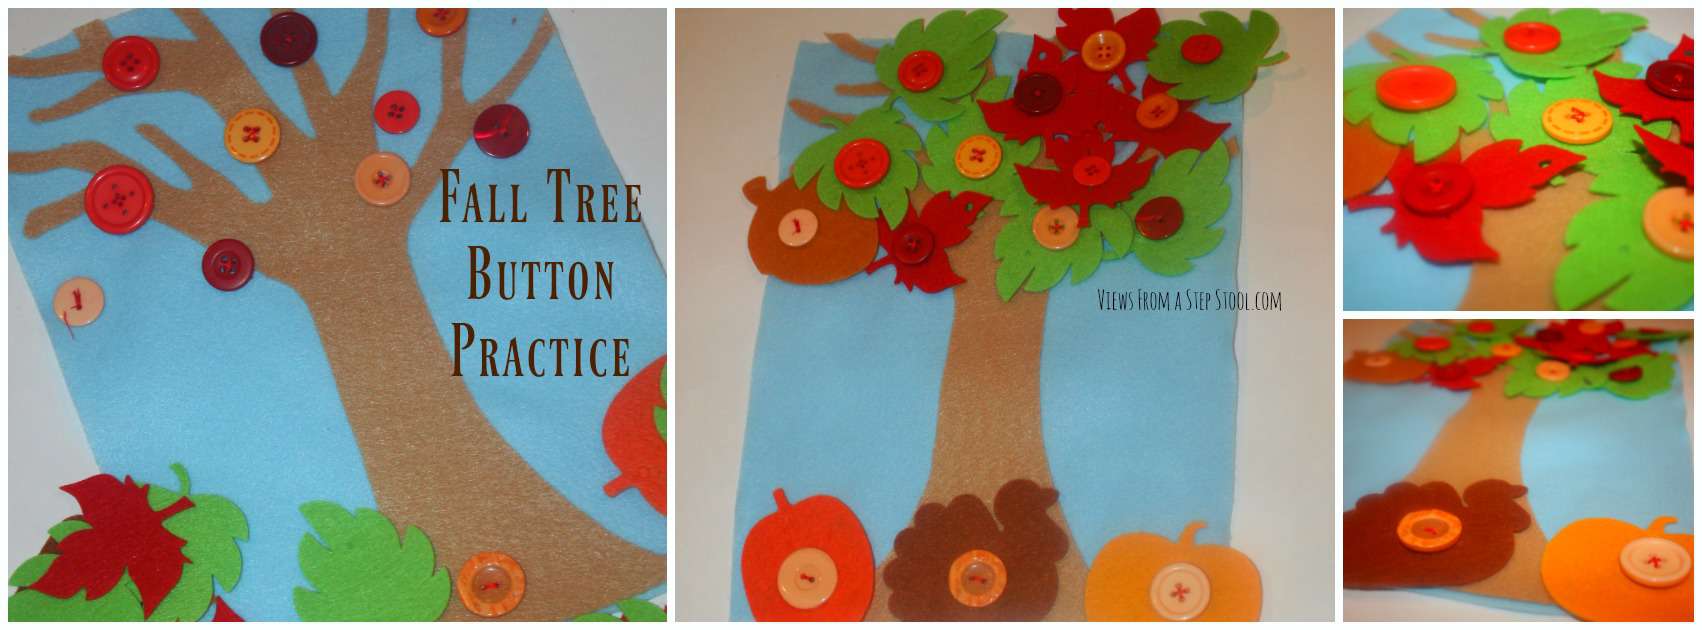 This button practice busy bag is themed for the fall with leaves & pumpkins! Kids can work on fine motor skills by putting the leaves on & taking them off! 